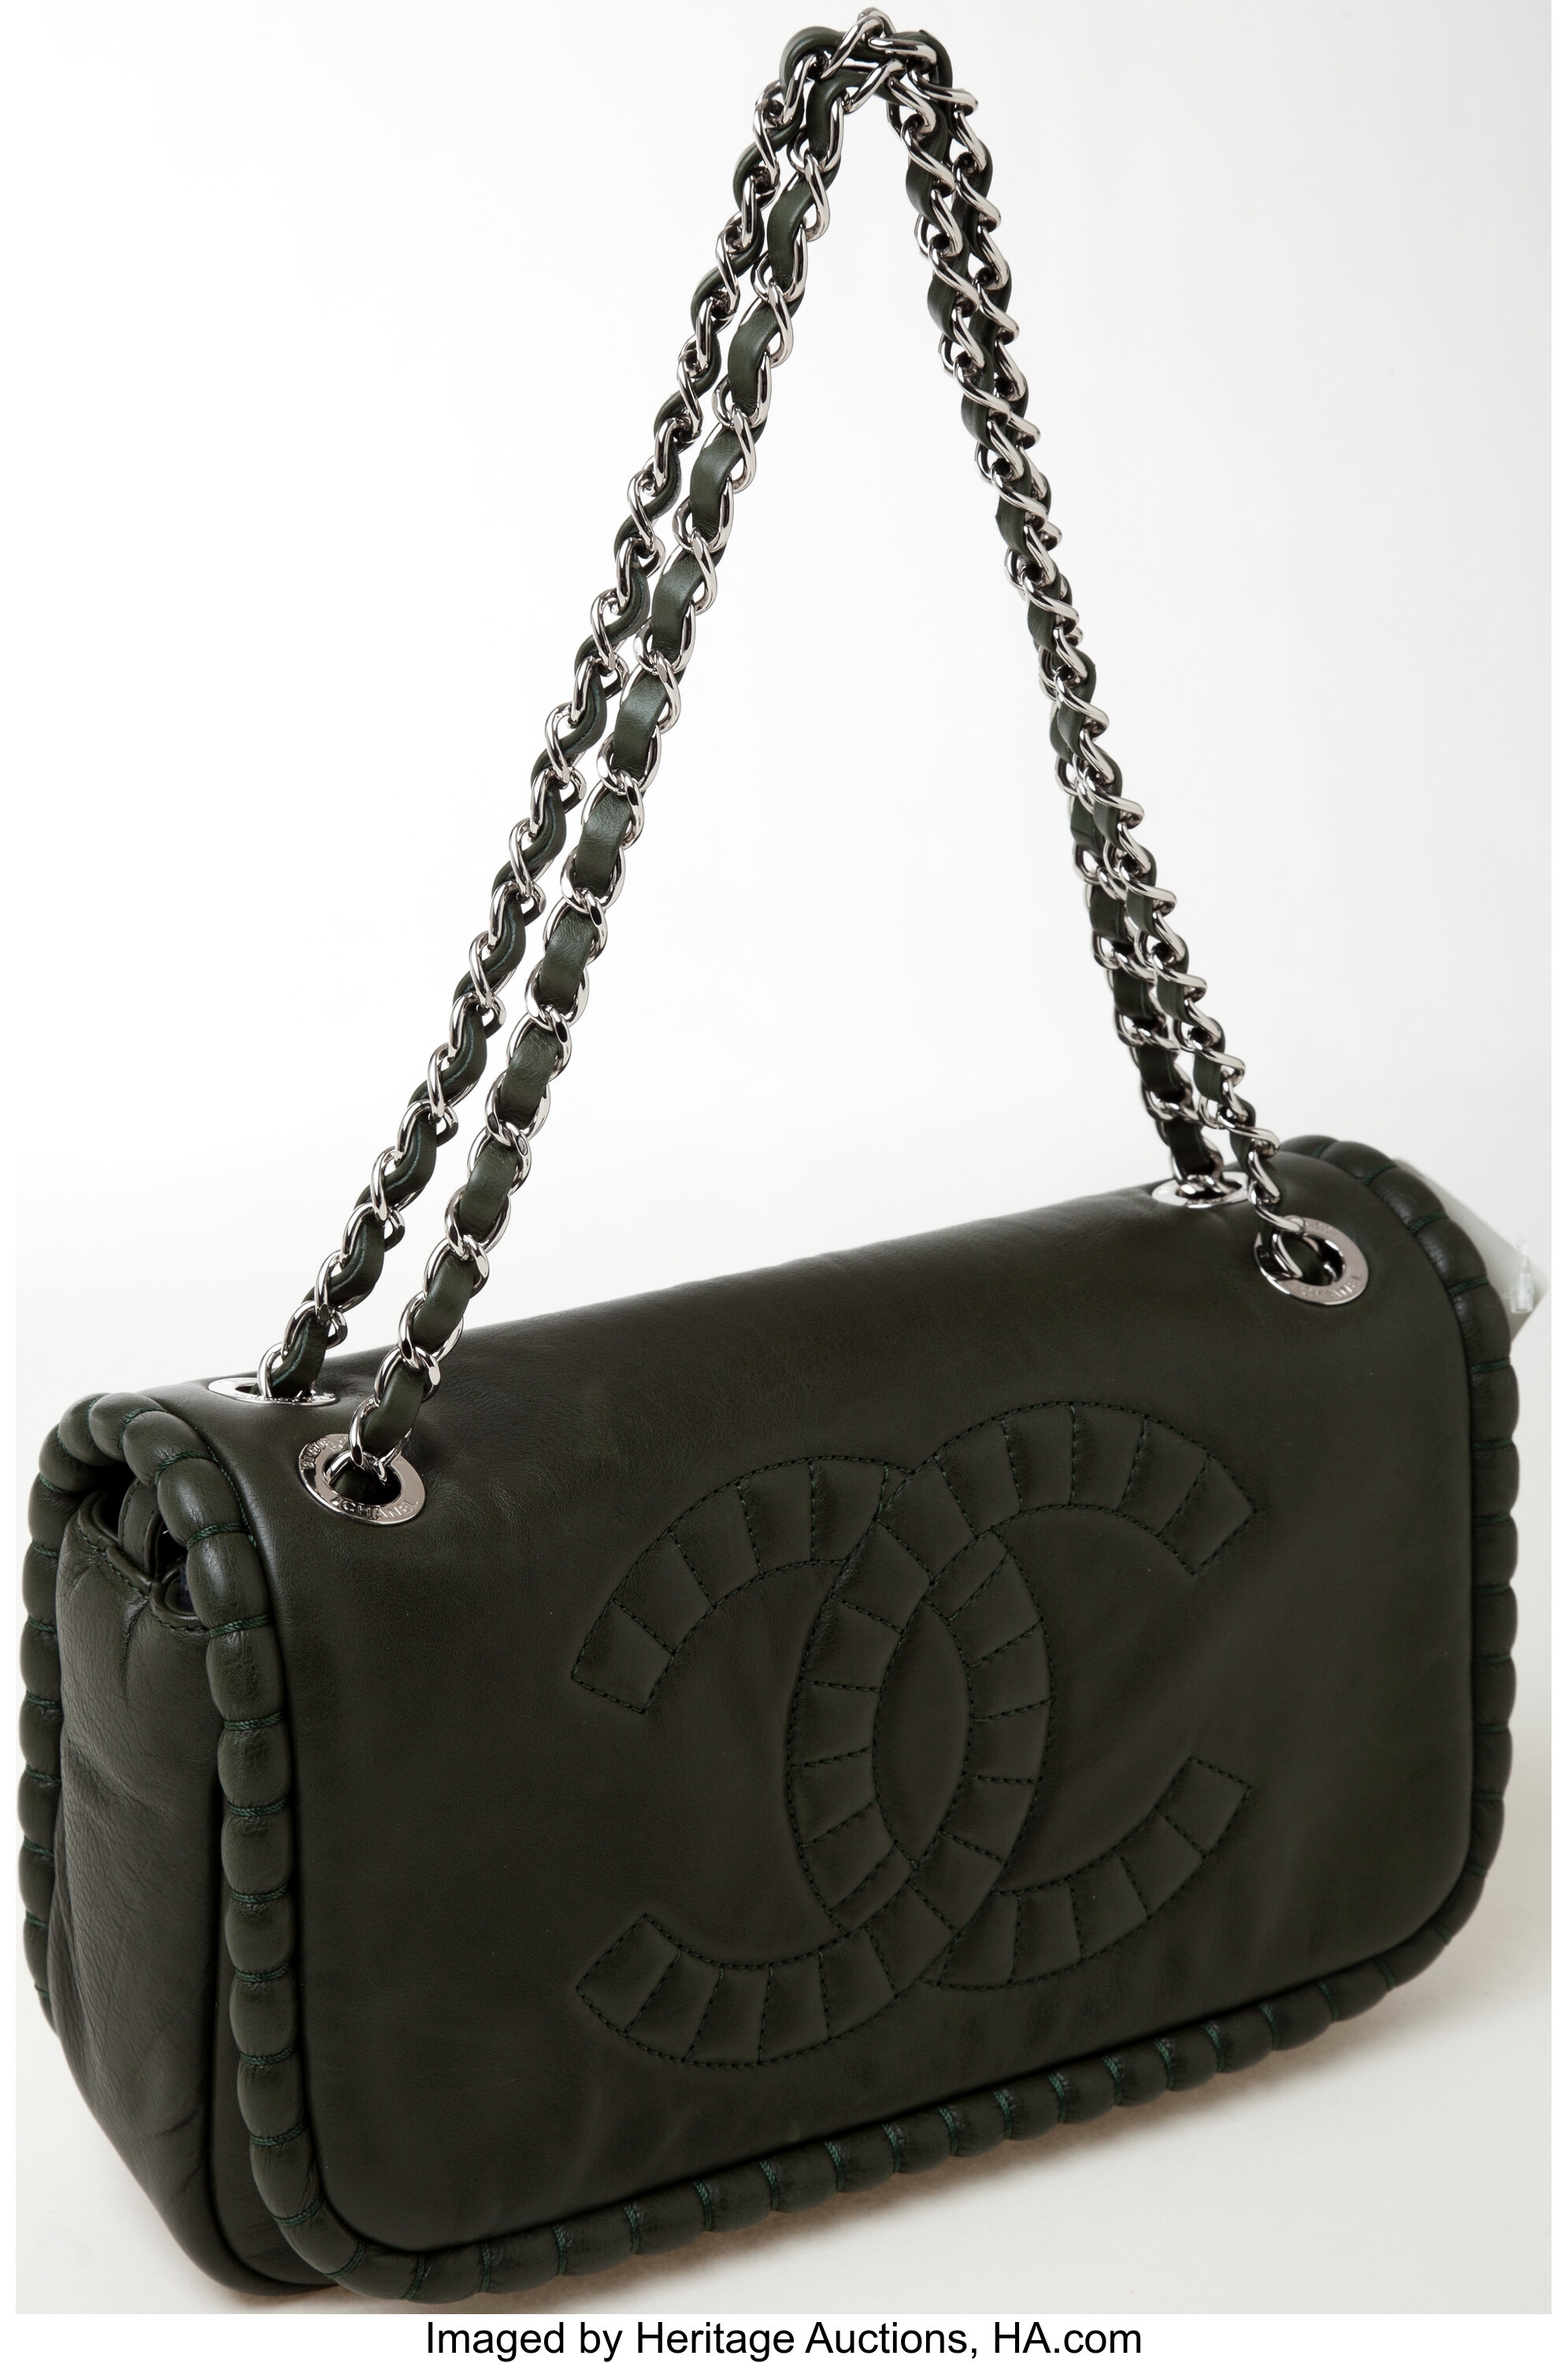 Heritage Vintage: Chanel Dark Green Lambskin Leather CC Flap Bag. | Lot  #76015 | Heritage Auctions